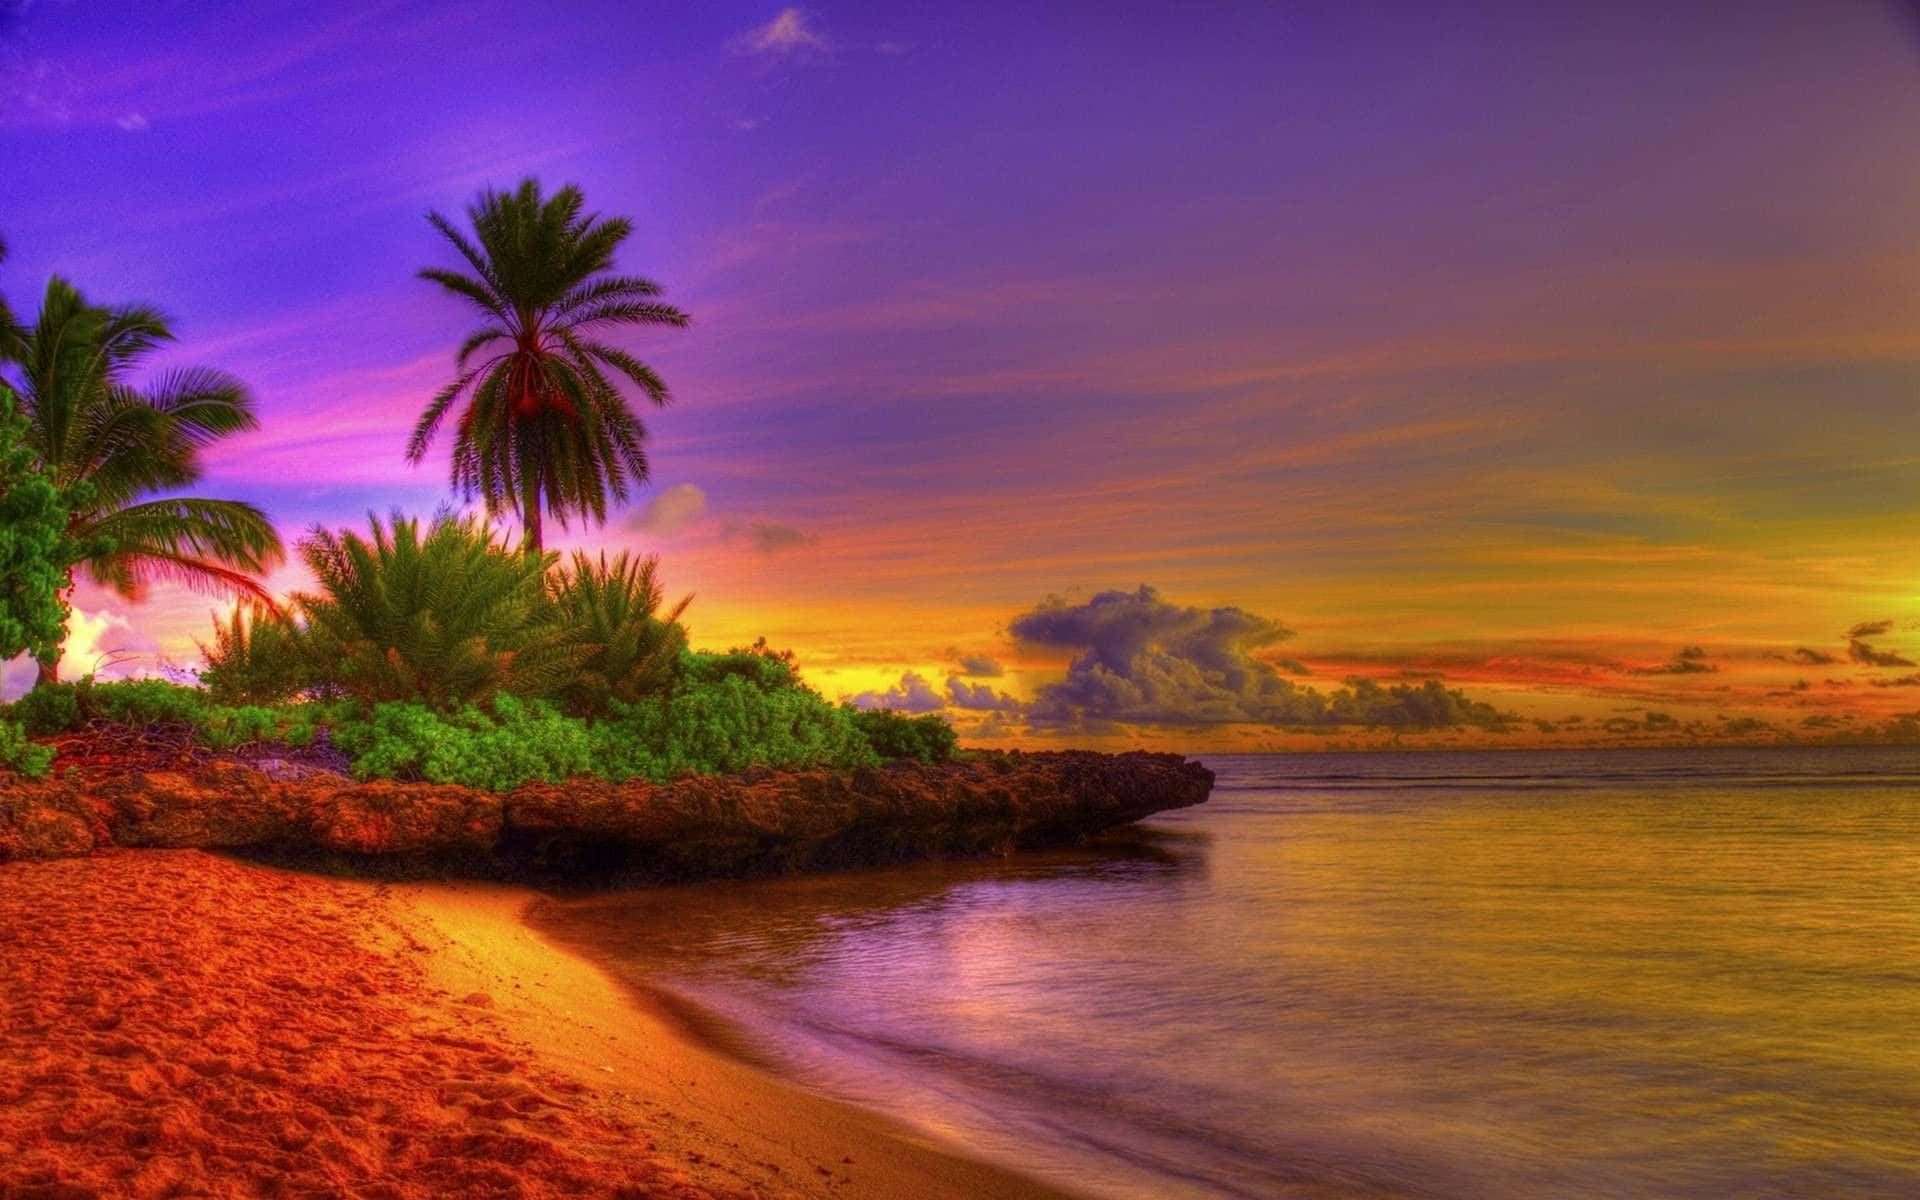 A Colorful Sunset On A Beach With Palm Trees